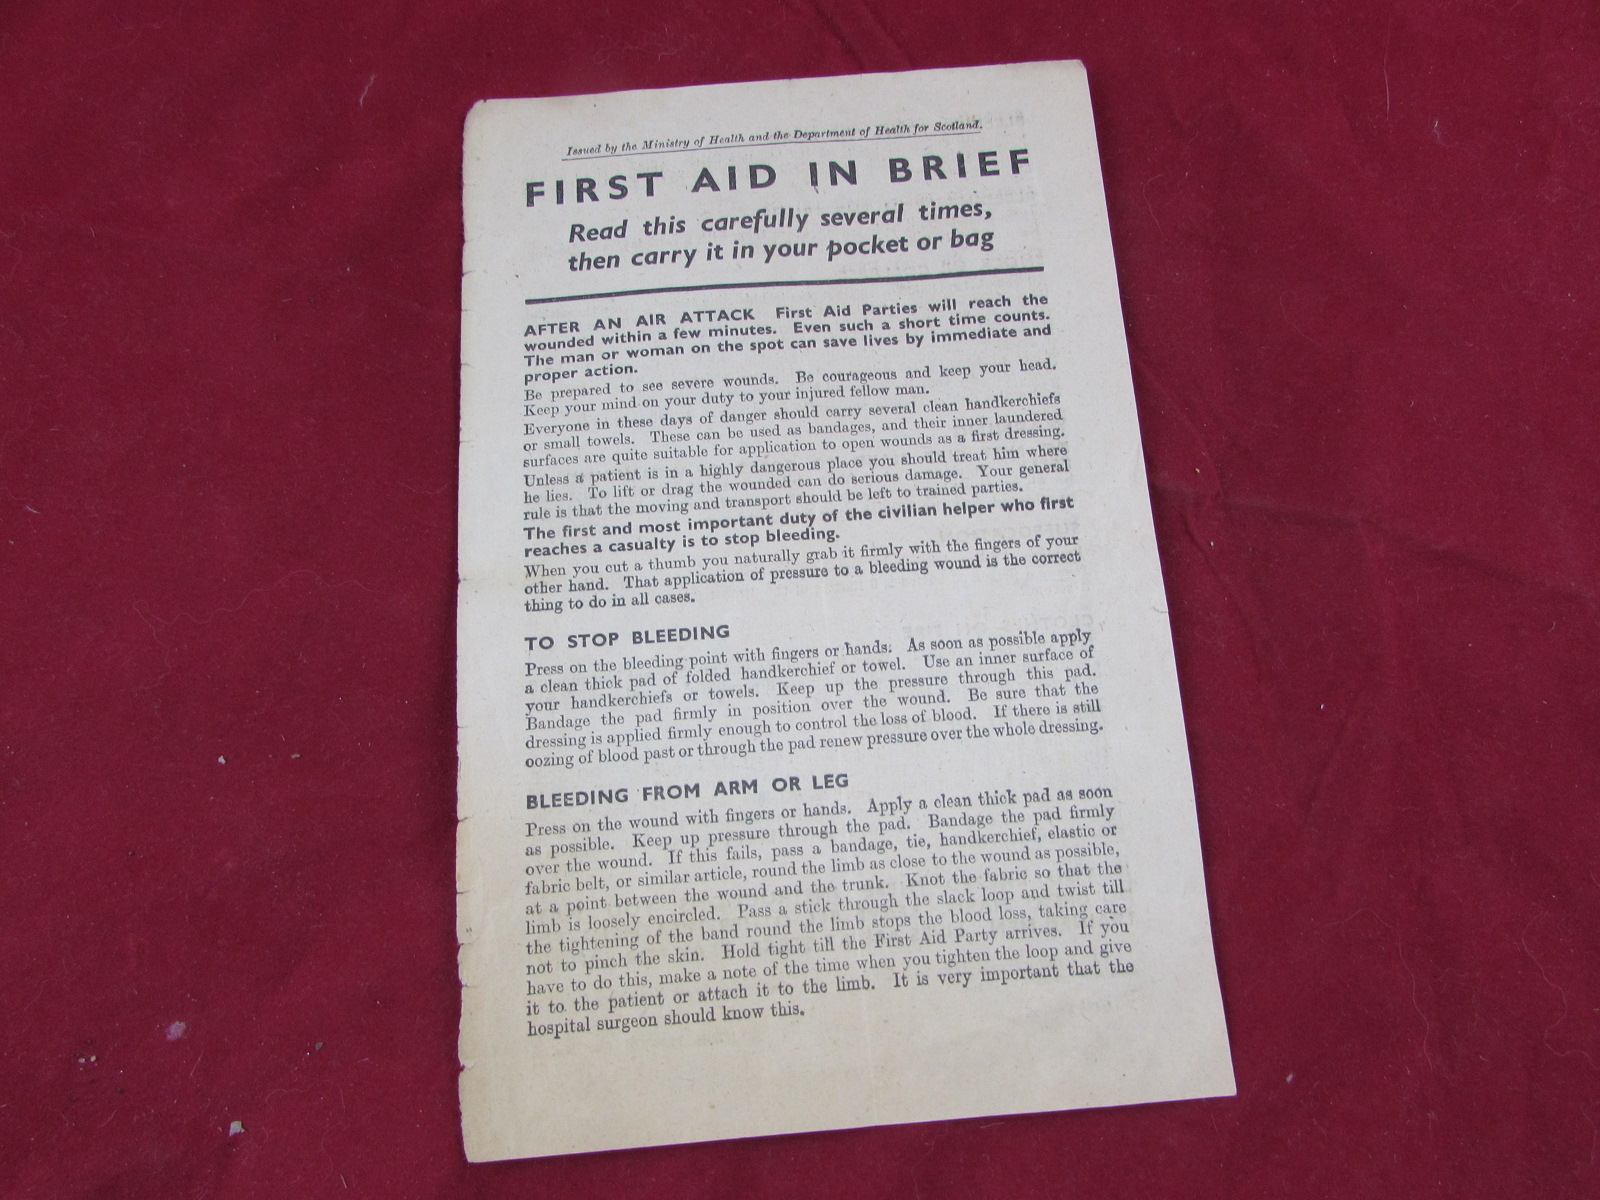 WW2 First Aid in Brief pamphlet for Scotland